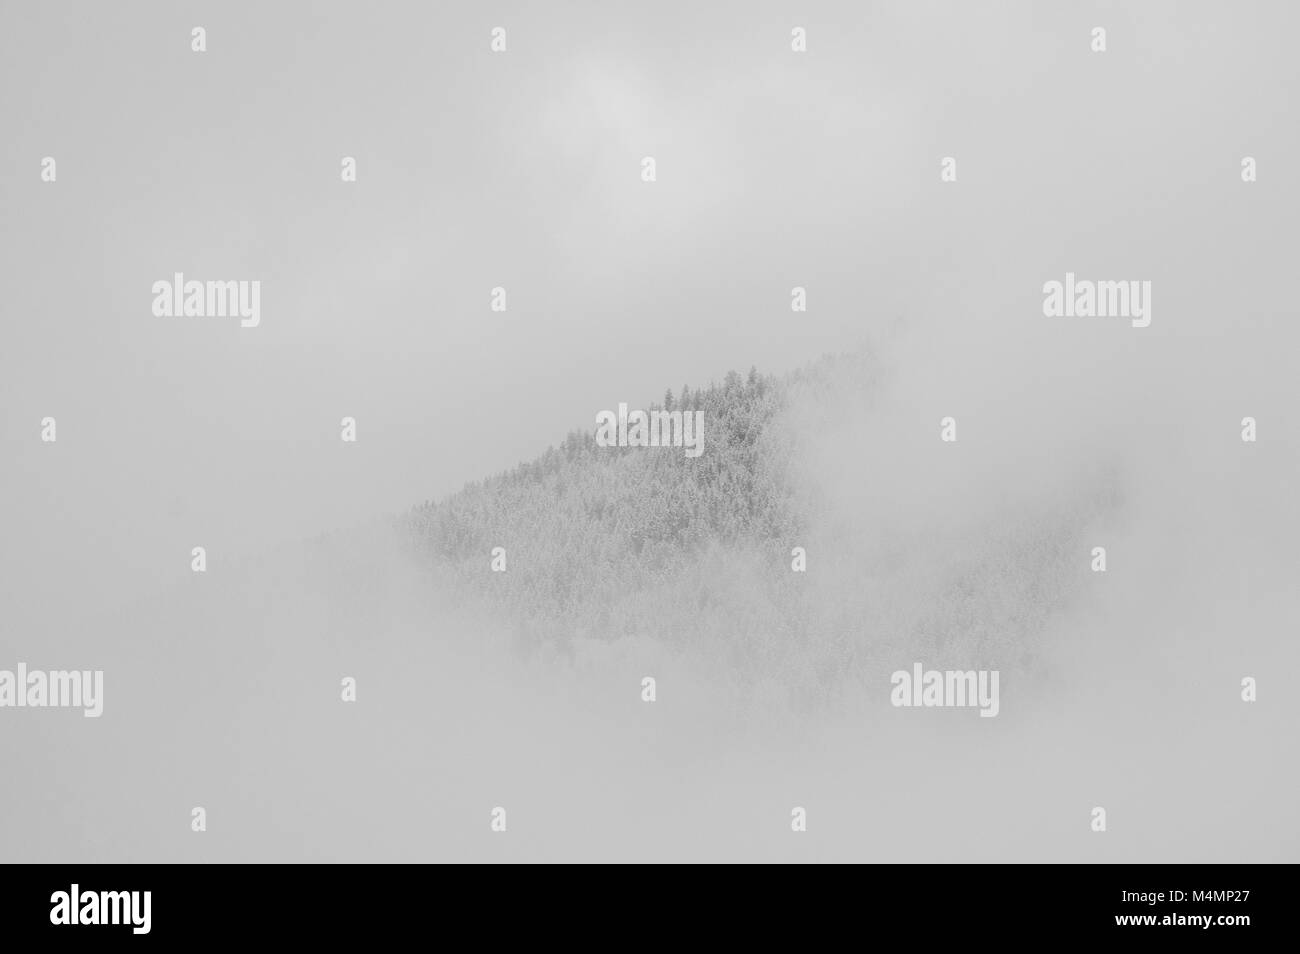 Mountain ridge with frost and snow covered trees surrounded by clouds and fog in monochrome. Stock Photo